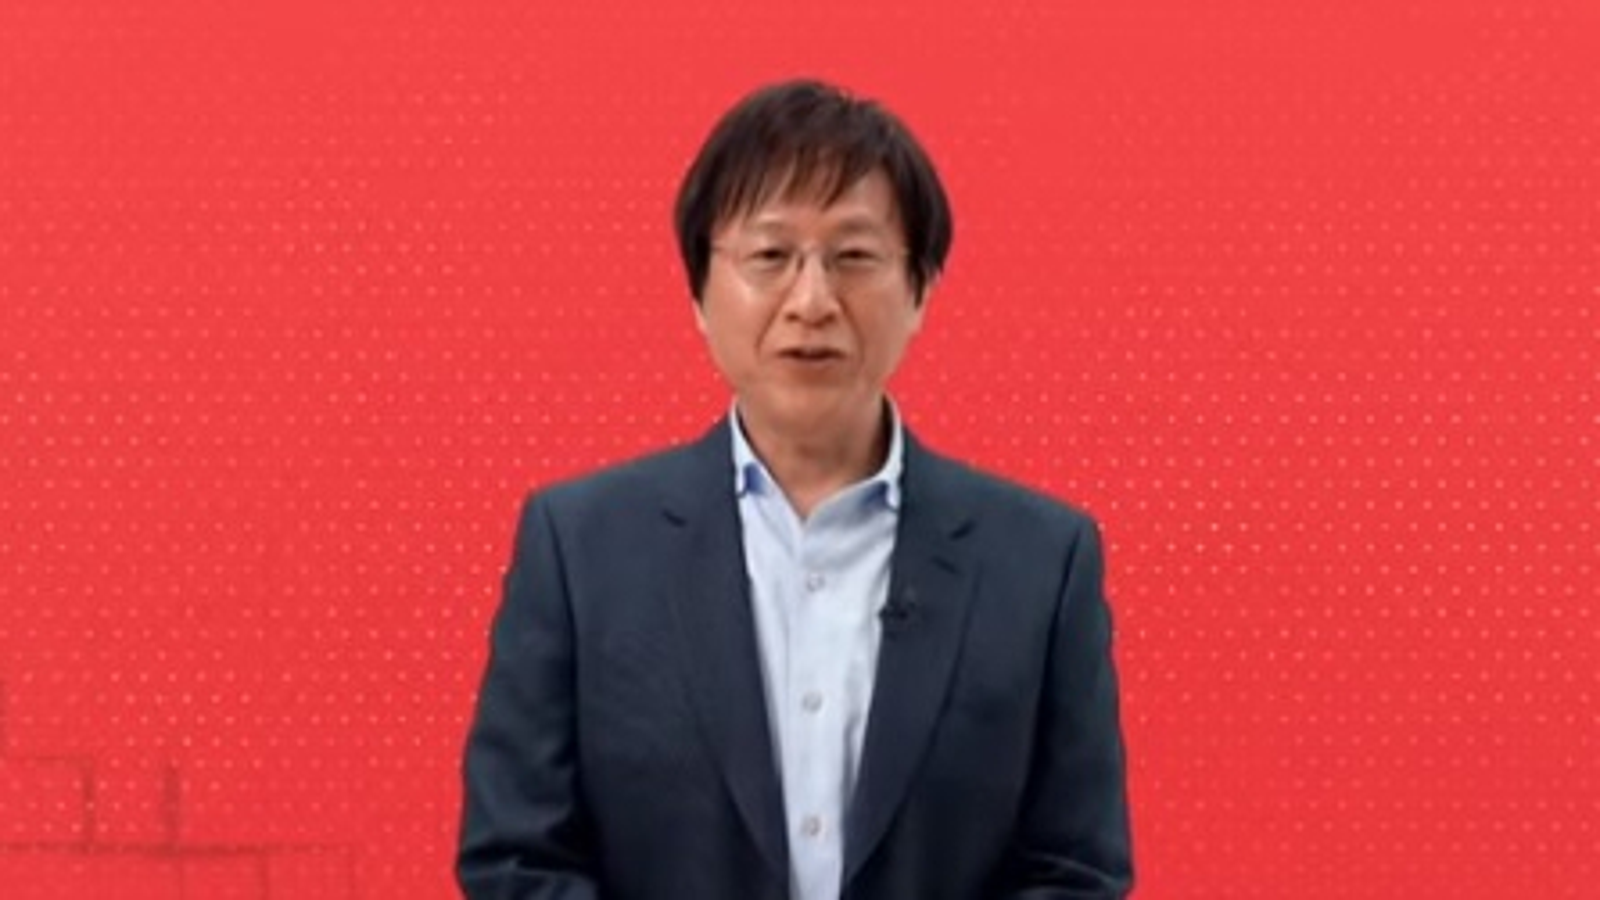 Everything Announced During The September 2022 Nintendo Direct